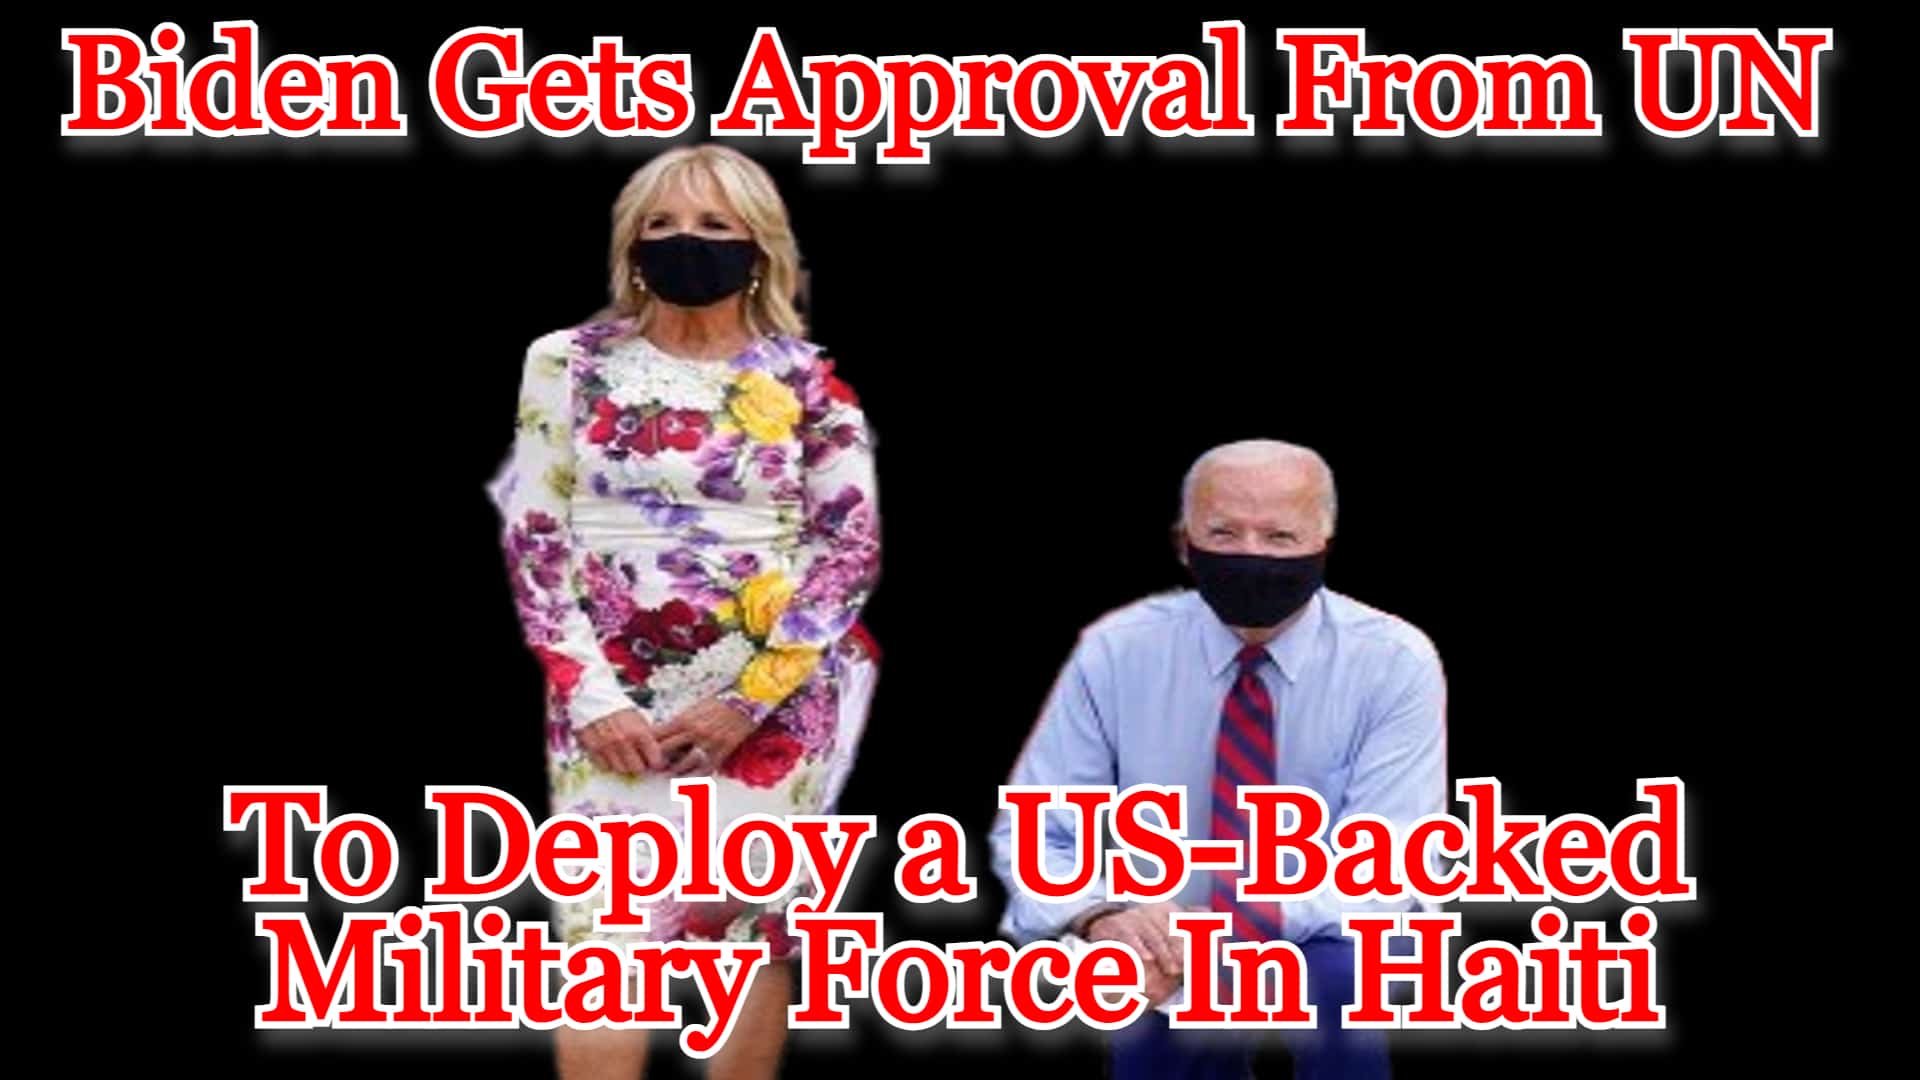 COI #480: Biden Gets Approval From UN to Deploy a US-Backed Military Force in Haiti